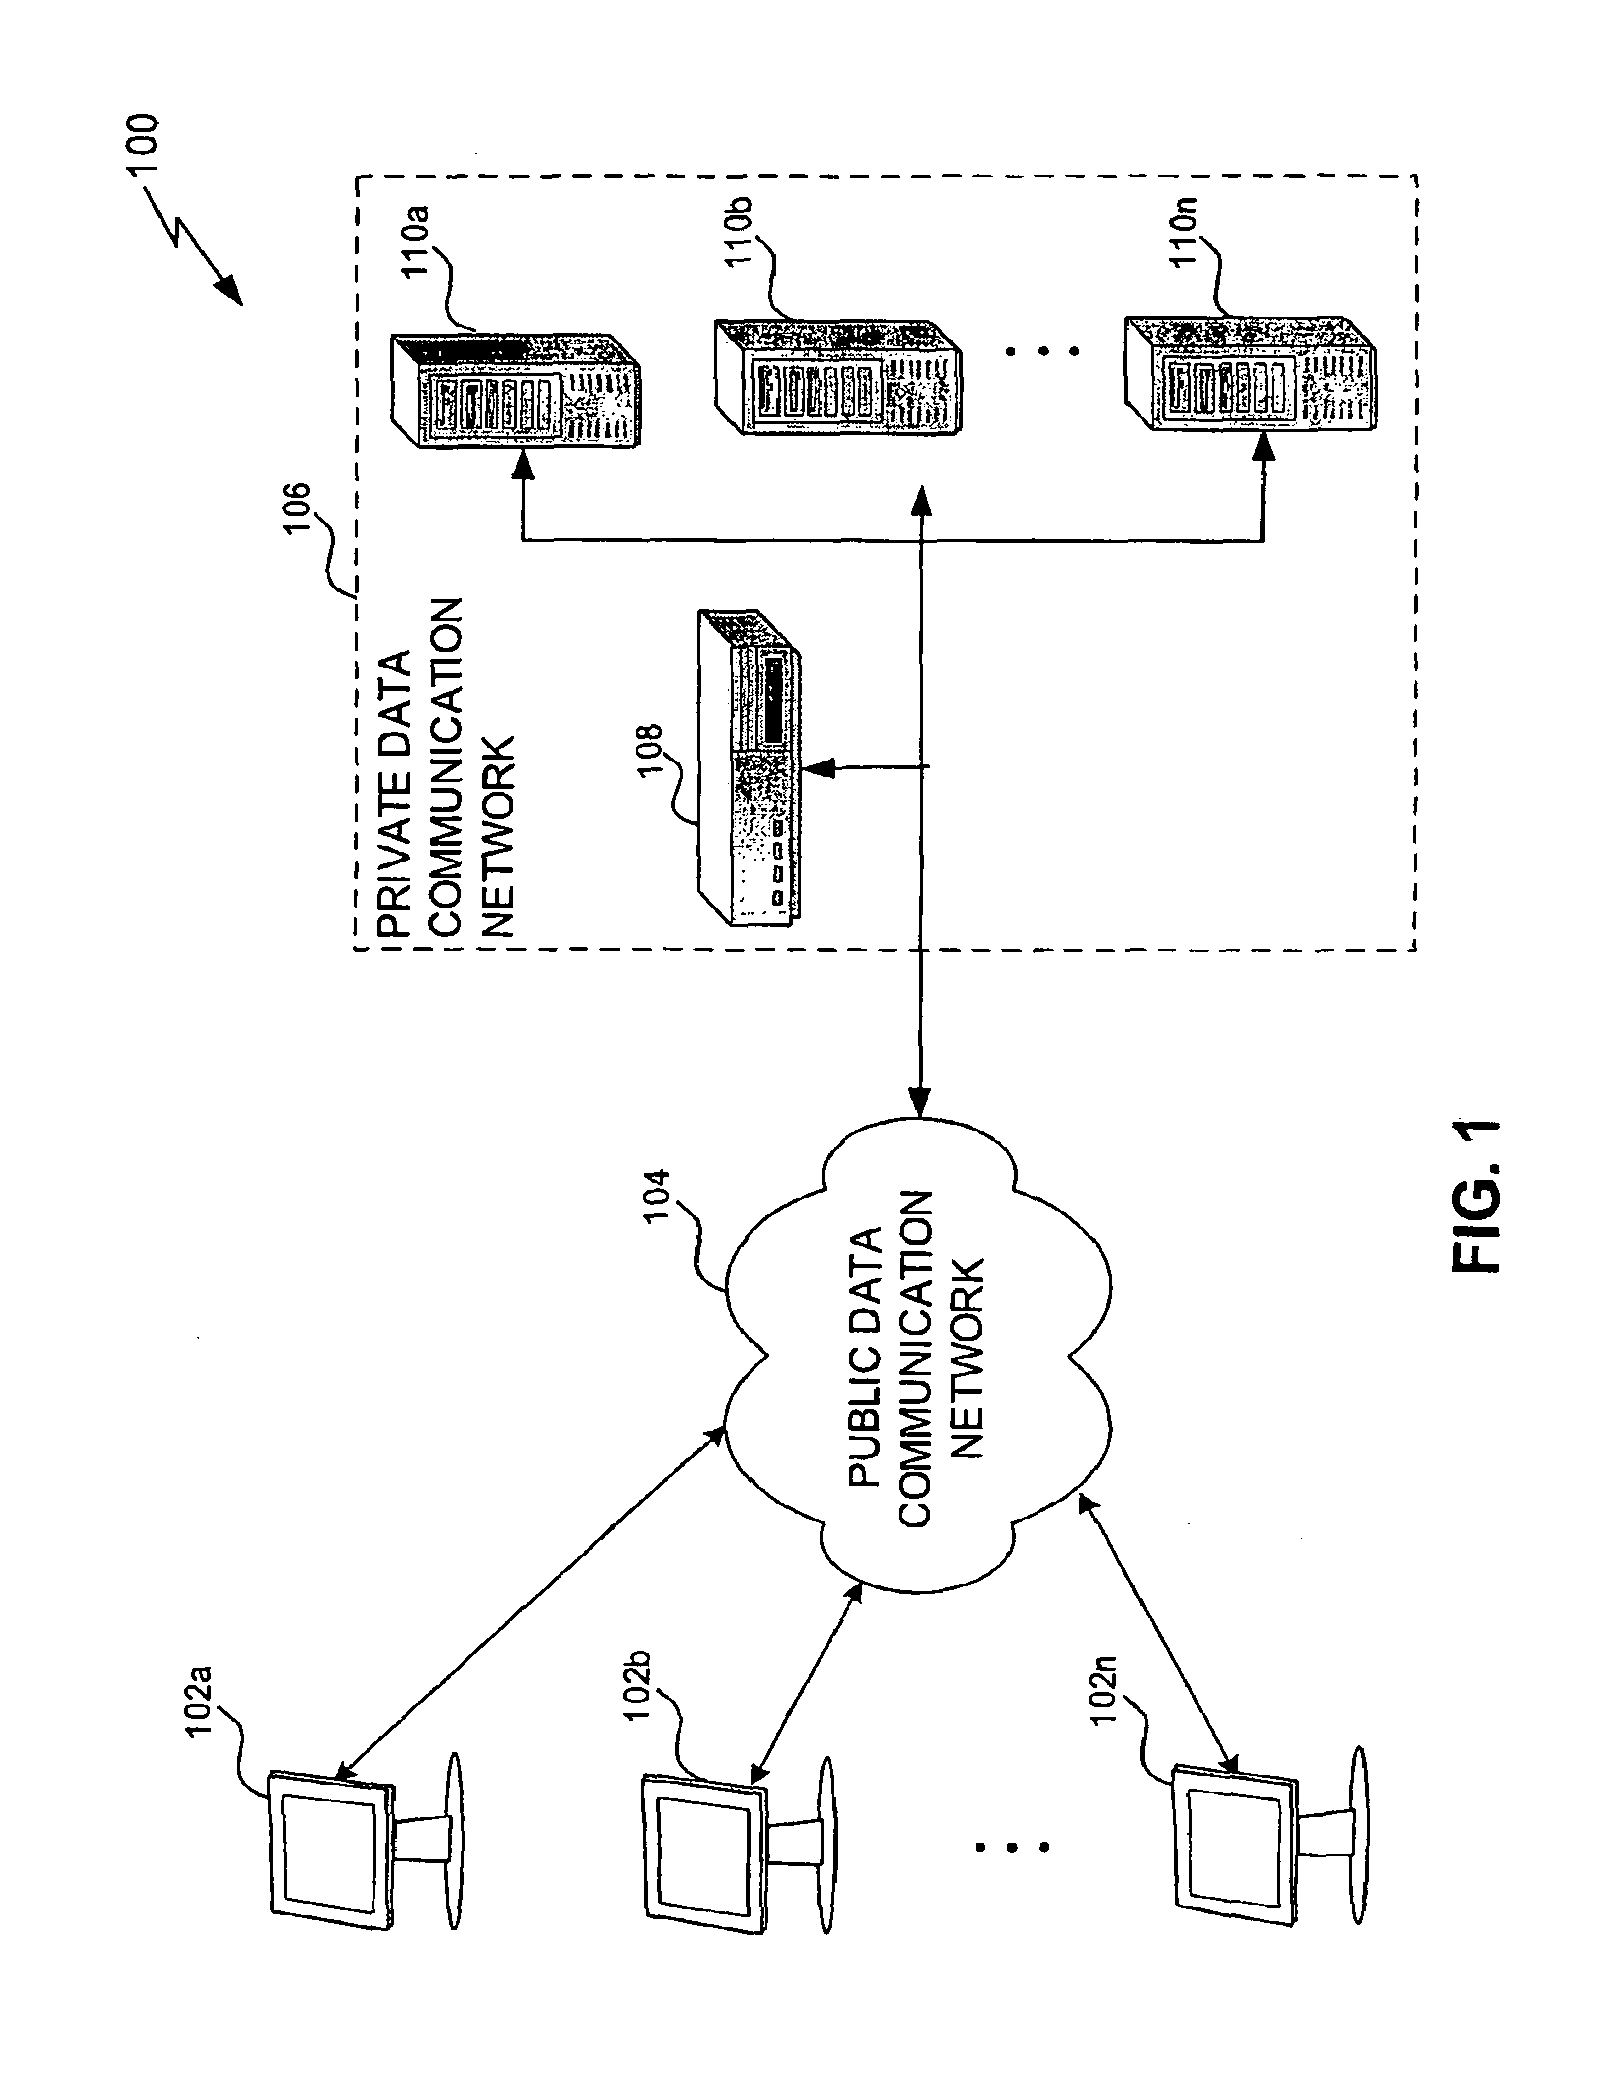 System and method for establishing a virtual private network